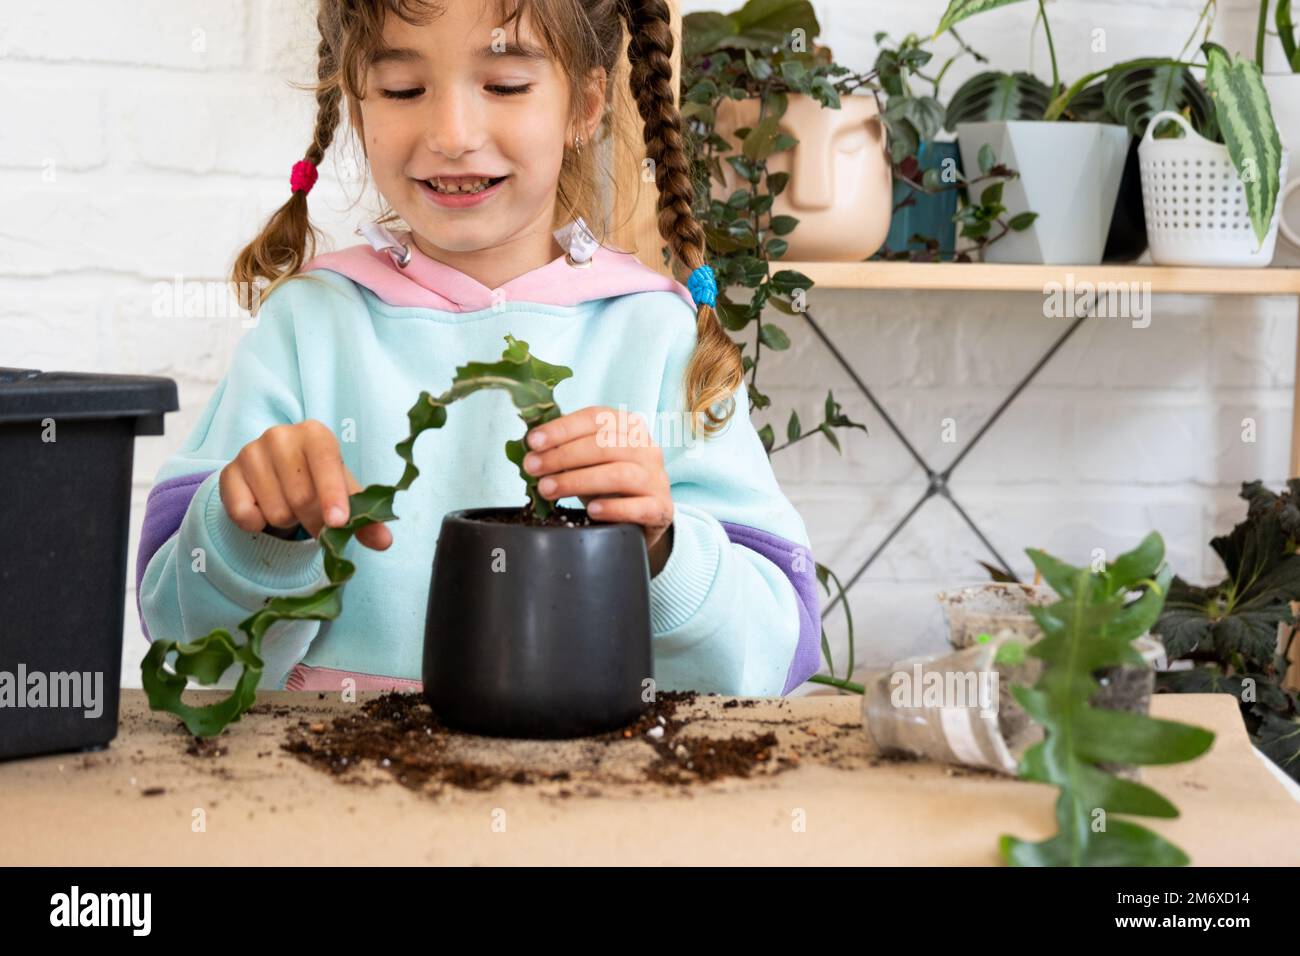 The girl happily takes care of home plants, transplants them into a new soil and pot, embraces the succulent sansivieria, epiphy Stock Photo